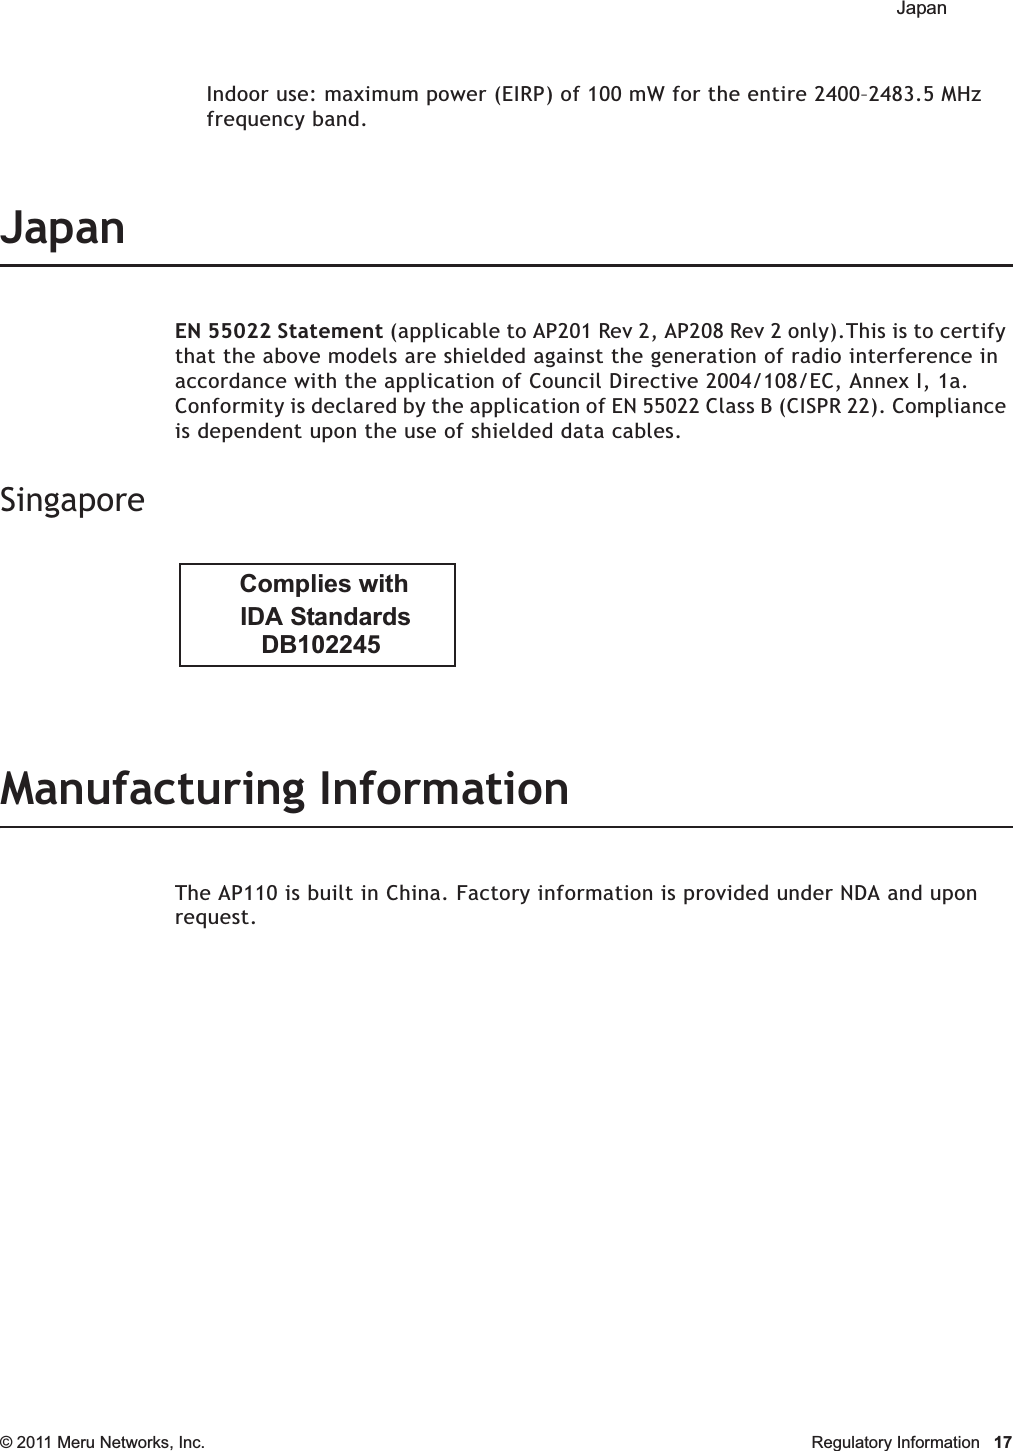  Japan © 2011 Meru Networks, Inc. Regulatory Information 17Indoor use: maximum power (EIRP) of 100 mW for the entire 2400–2483.5 MHz frequency band. JapanEN 55022 Statement (applicable to AP201 Rev 2, AP208 Rev 2 only).This is to certify that the above models are shielded against the generation of radio interference in accordance with the application of Council Directive 2004/108/EC, Annex I, 1a. Conformity is declared by the application of EN 55022 Class B (CISPR 22). Compliance is dependent upon the use of shielded data cables.SingaporeManufacturing InformationThe AP110 is built in China. Factory information is provided under NDA and upon request.           DB102245        IDA Standards      Complies with